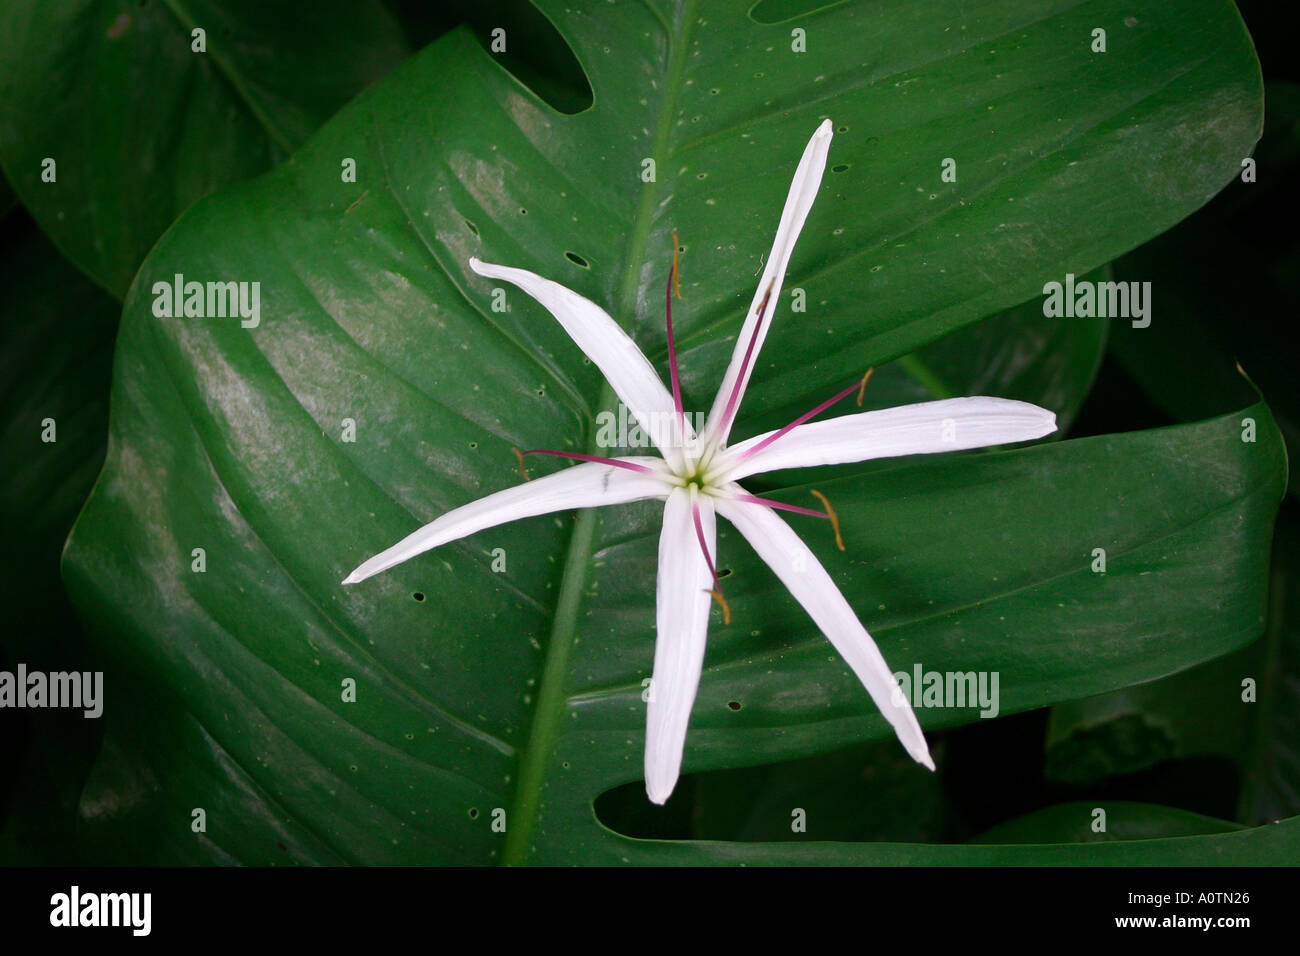 Spider lily flower growing through large green philodendron leaf Stock Photo